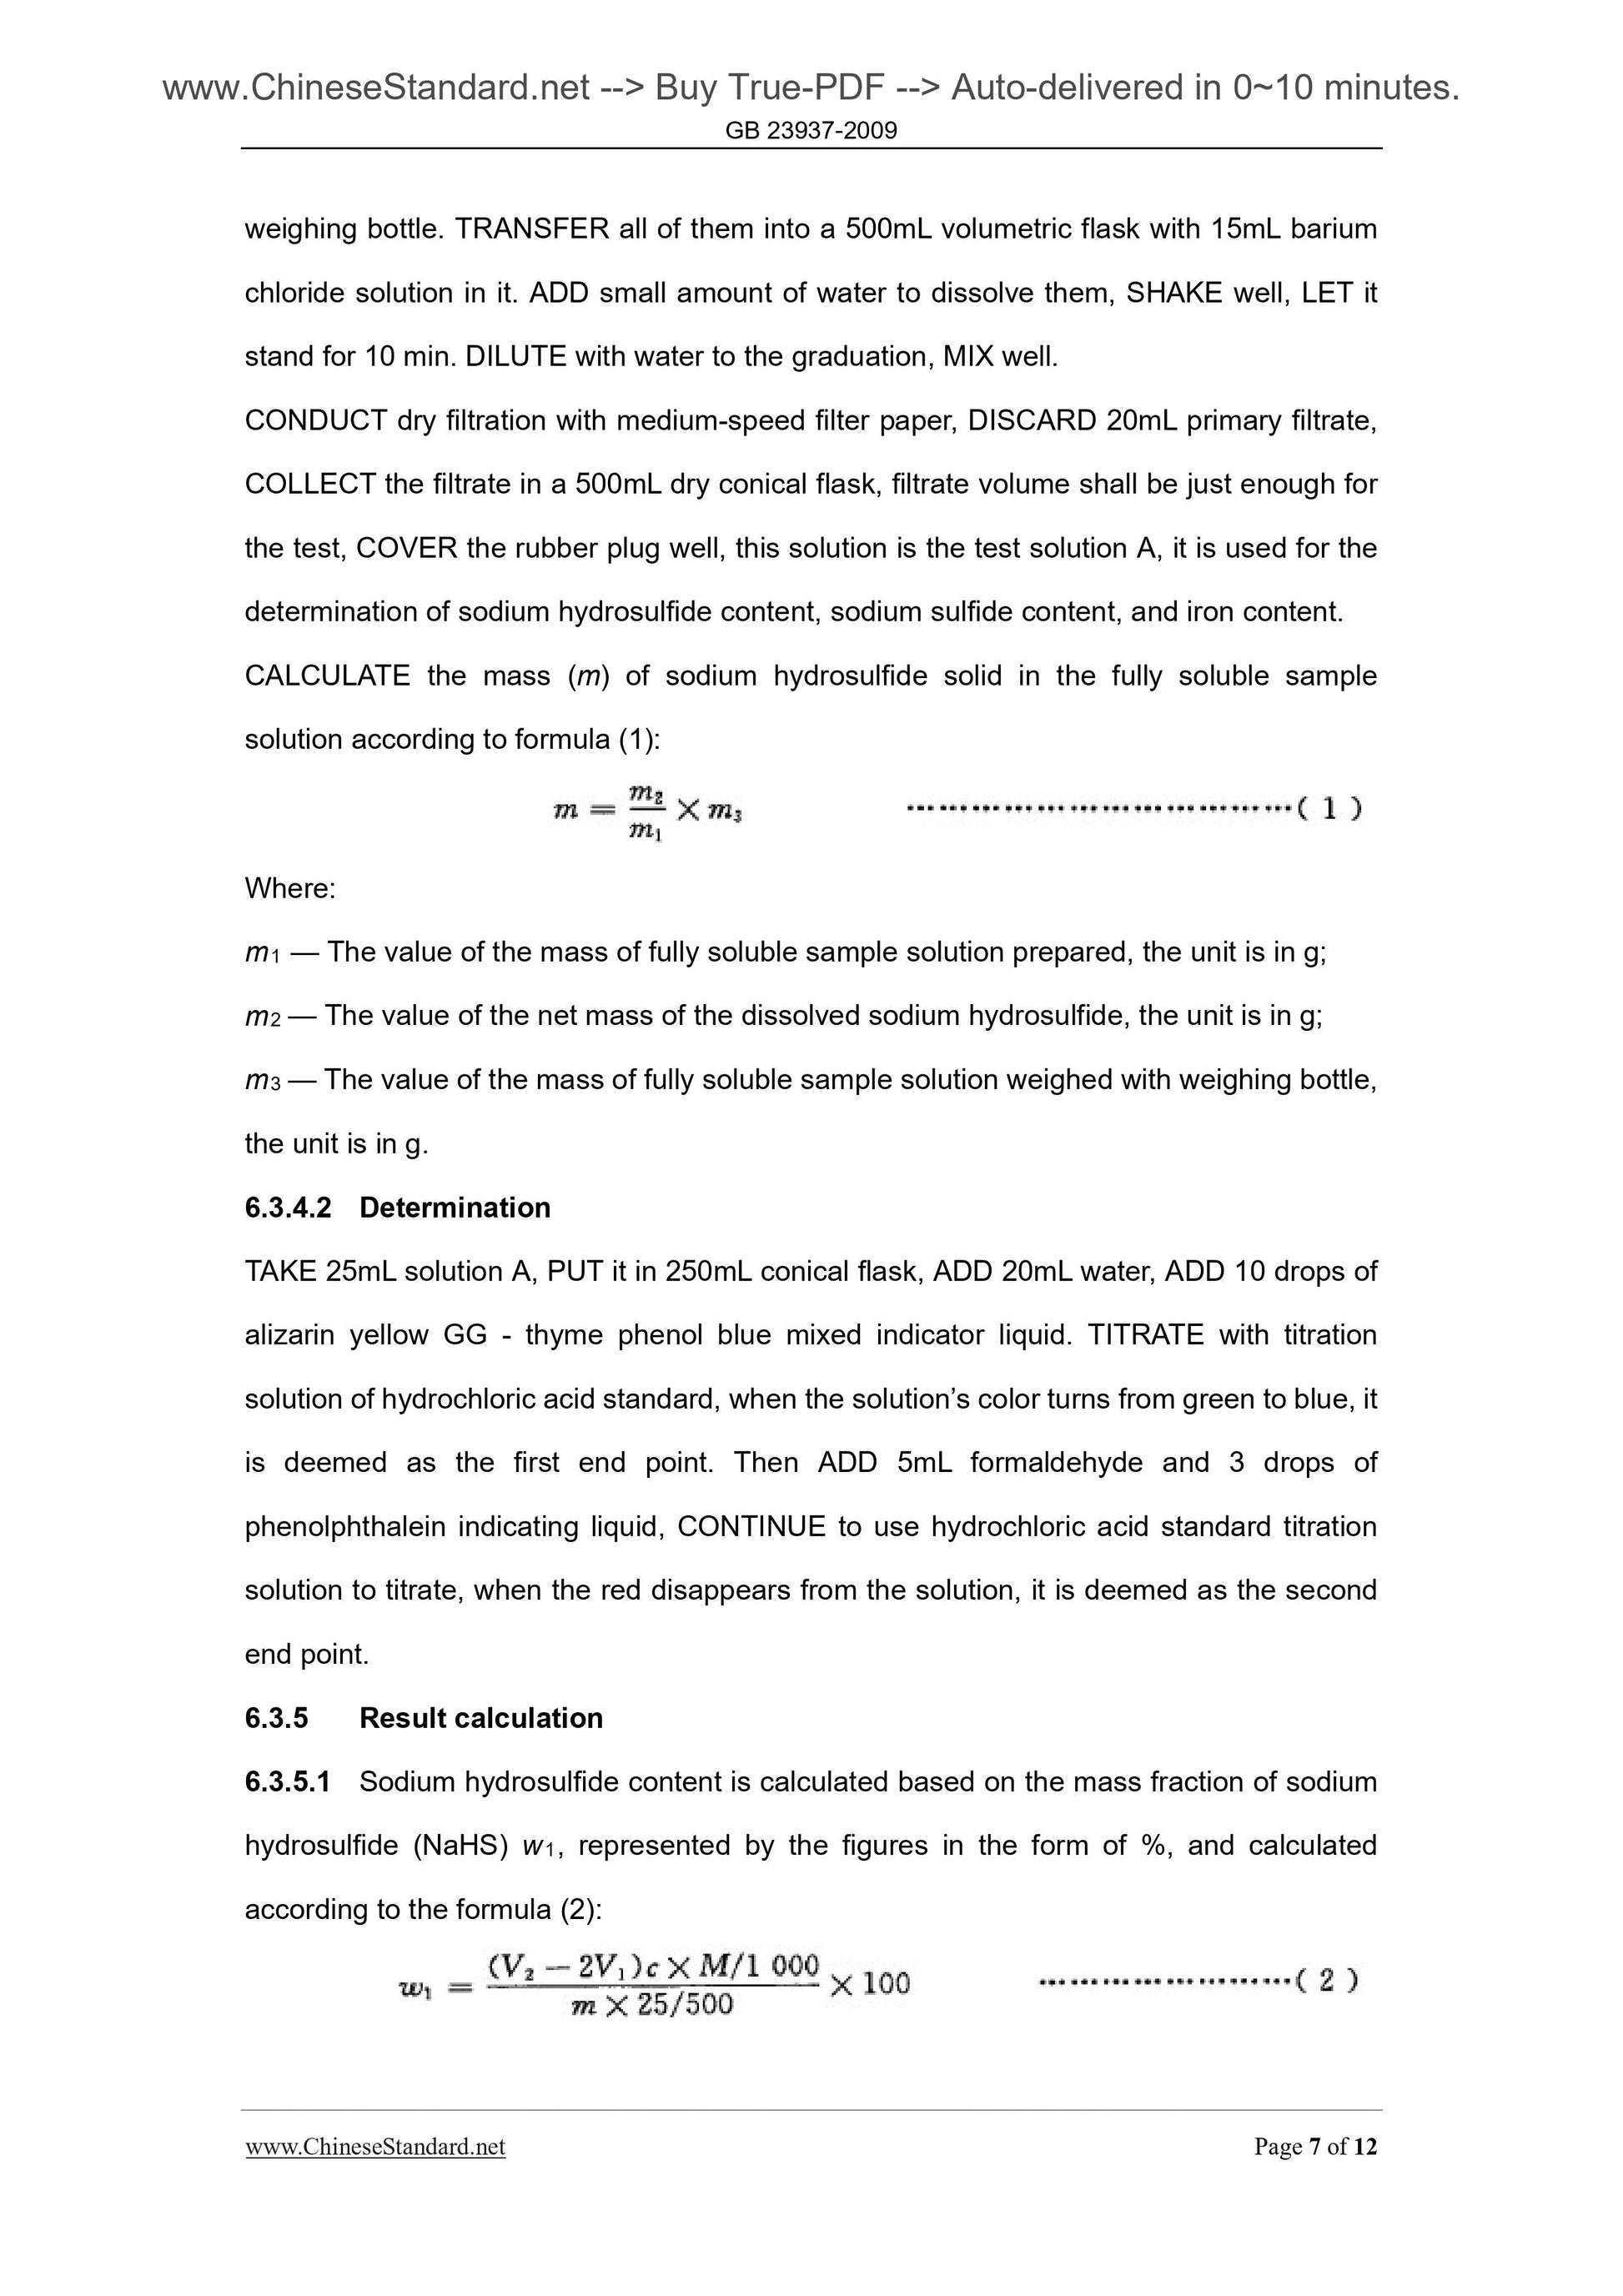 GB 23937-2009 Page 5